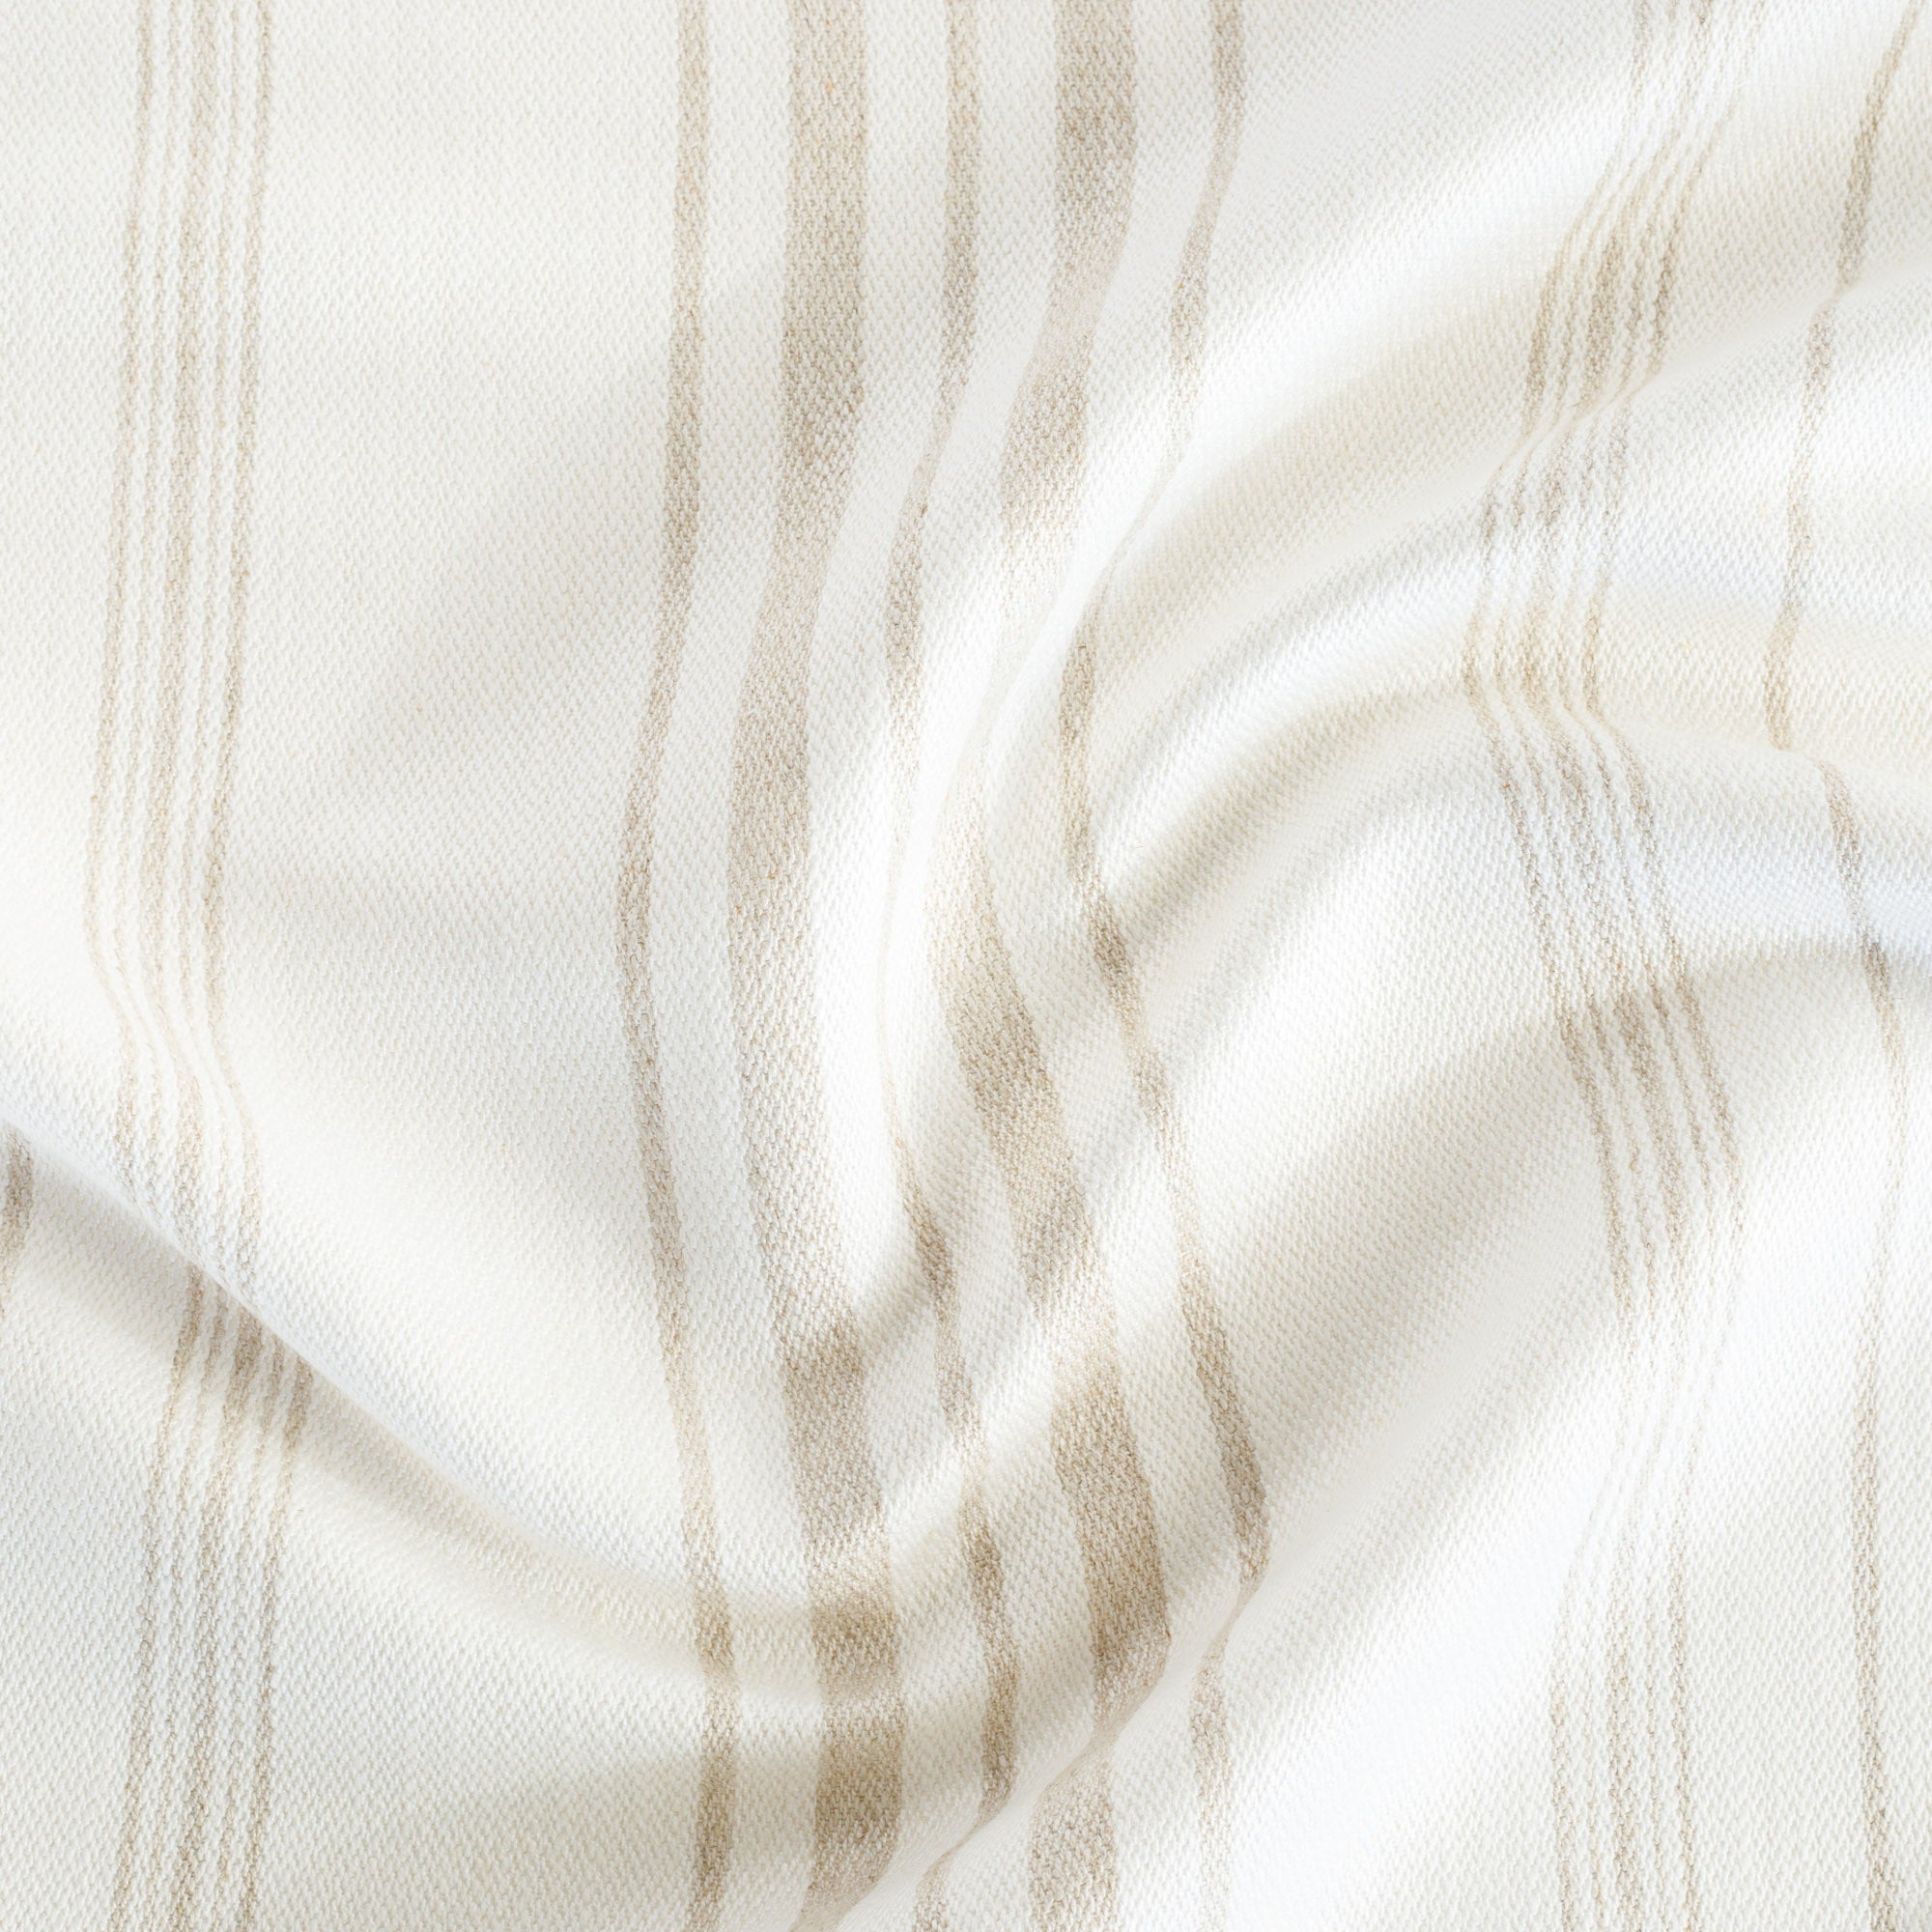 Collins Stripe Parchment, a white and beige vertical striped linen blend fabric from Tonic Living